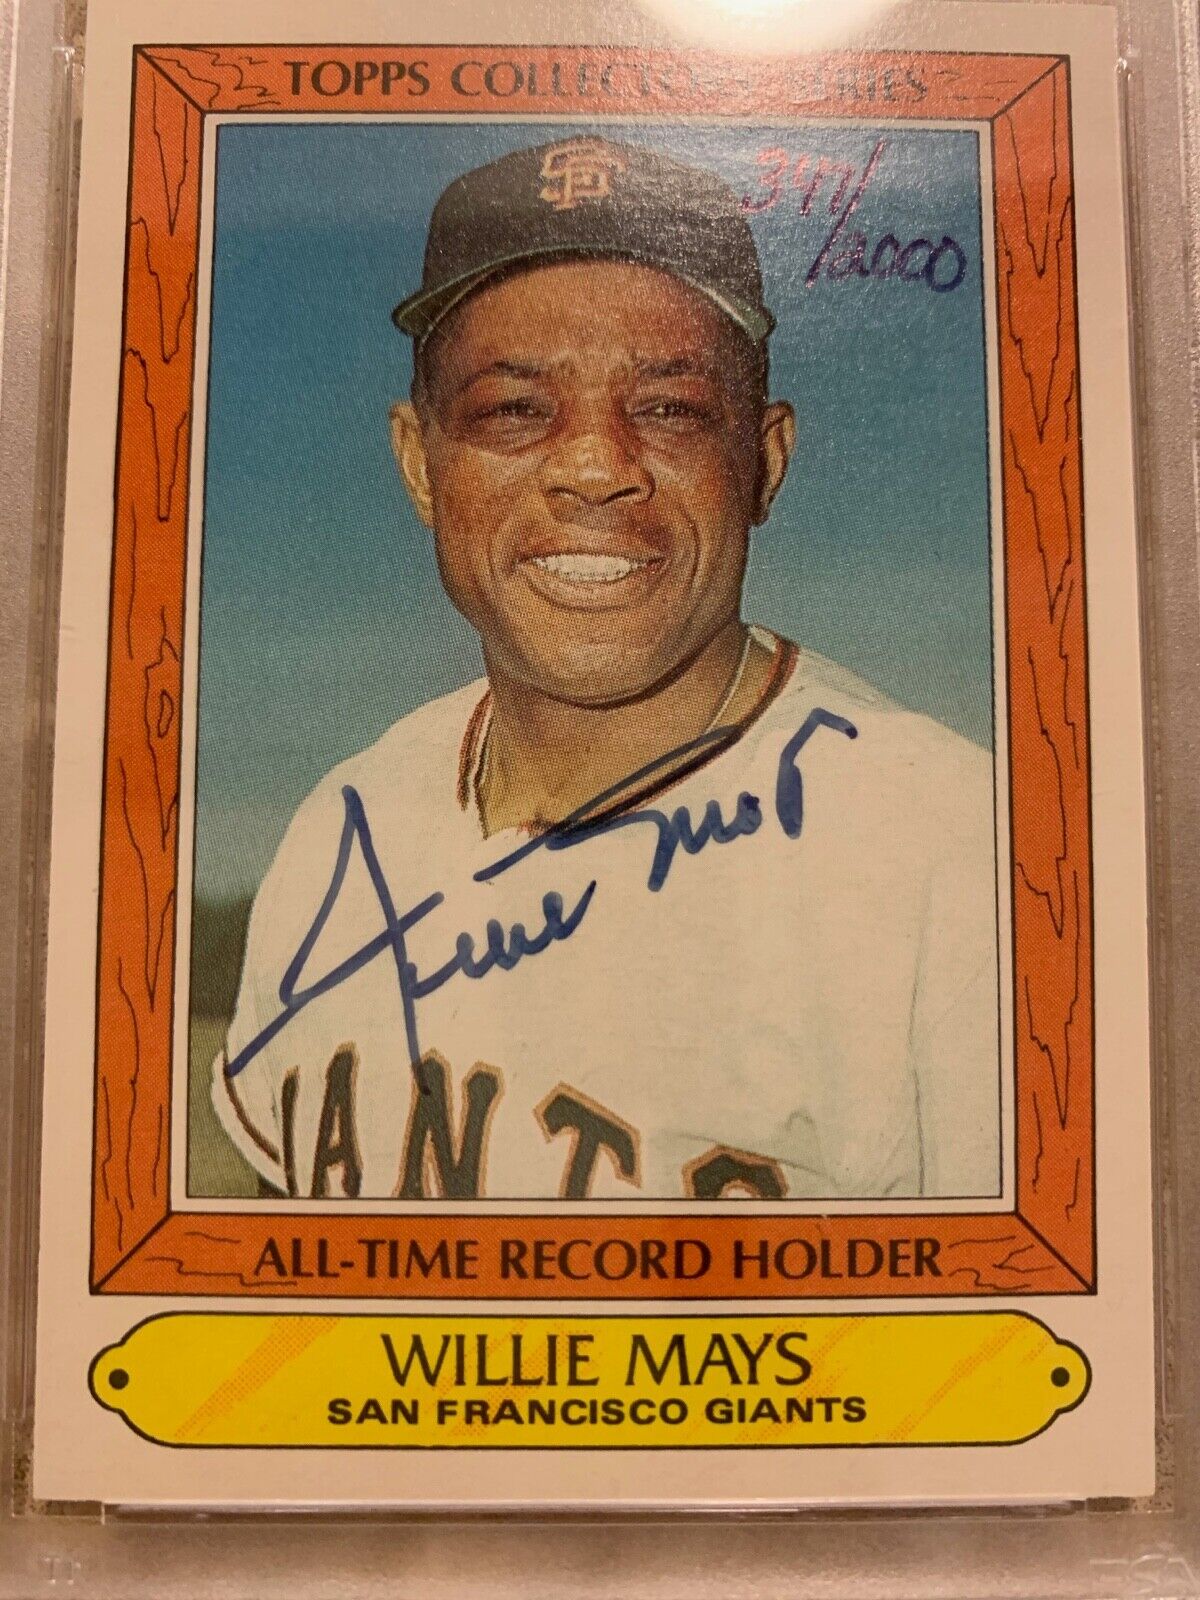 1985 Topps Collectors' Series Willie Mays Autographed Card PSA